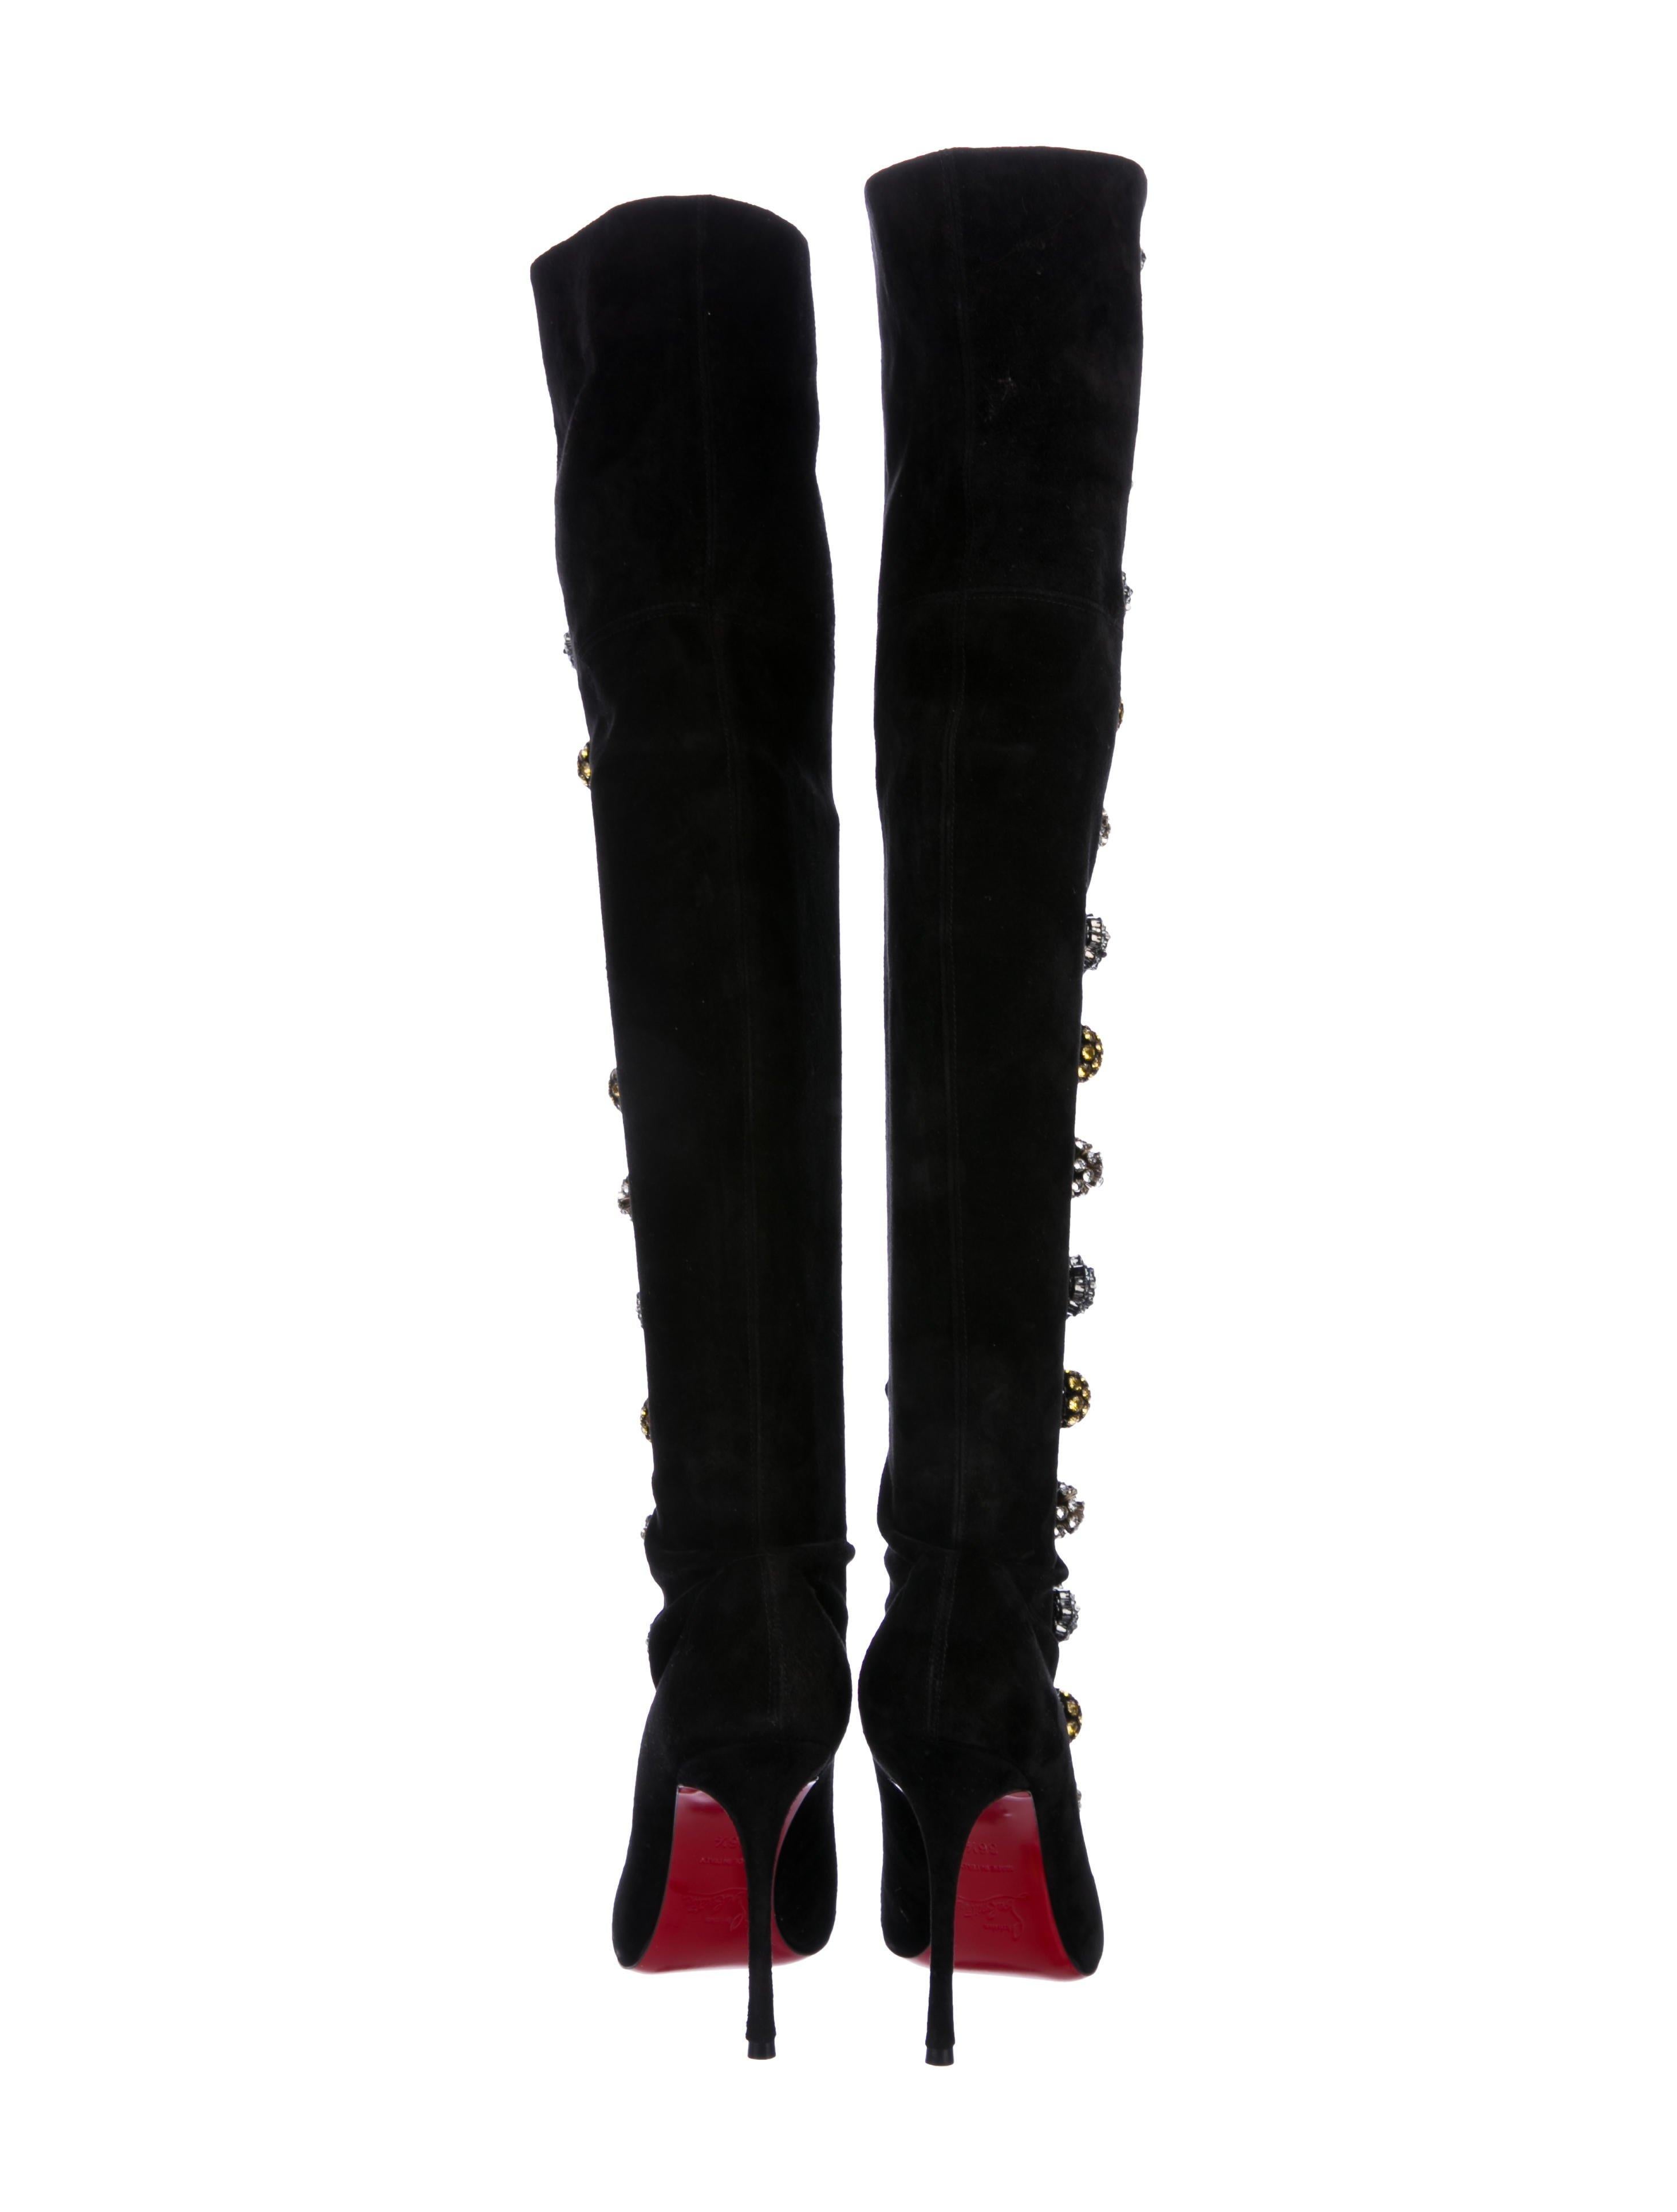 Women's Christian Louboutin NEW Black Suede Flower Buckle Evening Knee High Boots